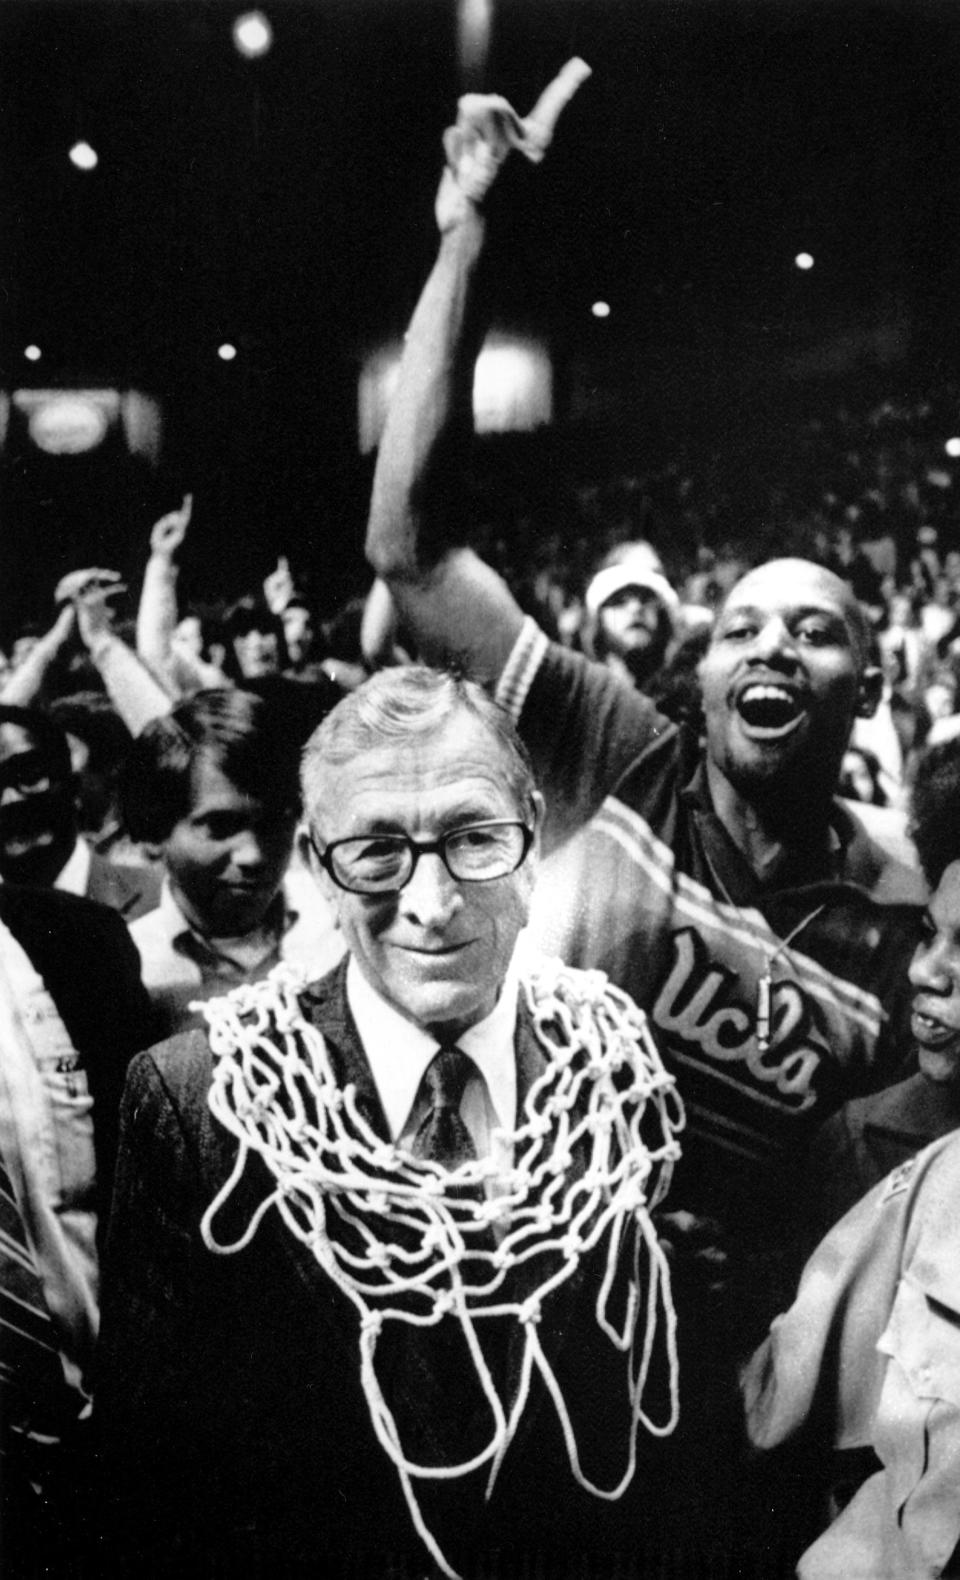 FILE - UCLA basketball coach John Wooden wears a basketball net around his neck after his team won the NCAA basketball championship over Kentucky, 92-85, in San Diego, Calif., March 31, 1975. The win gave him his tenth NCAA championship. (AP Photo, File)